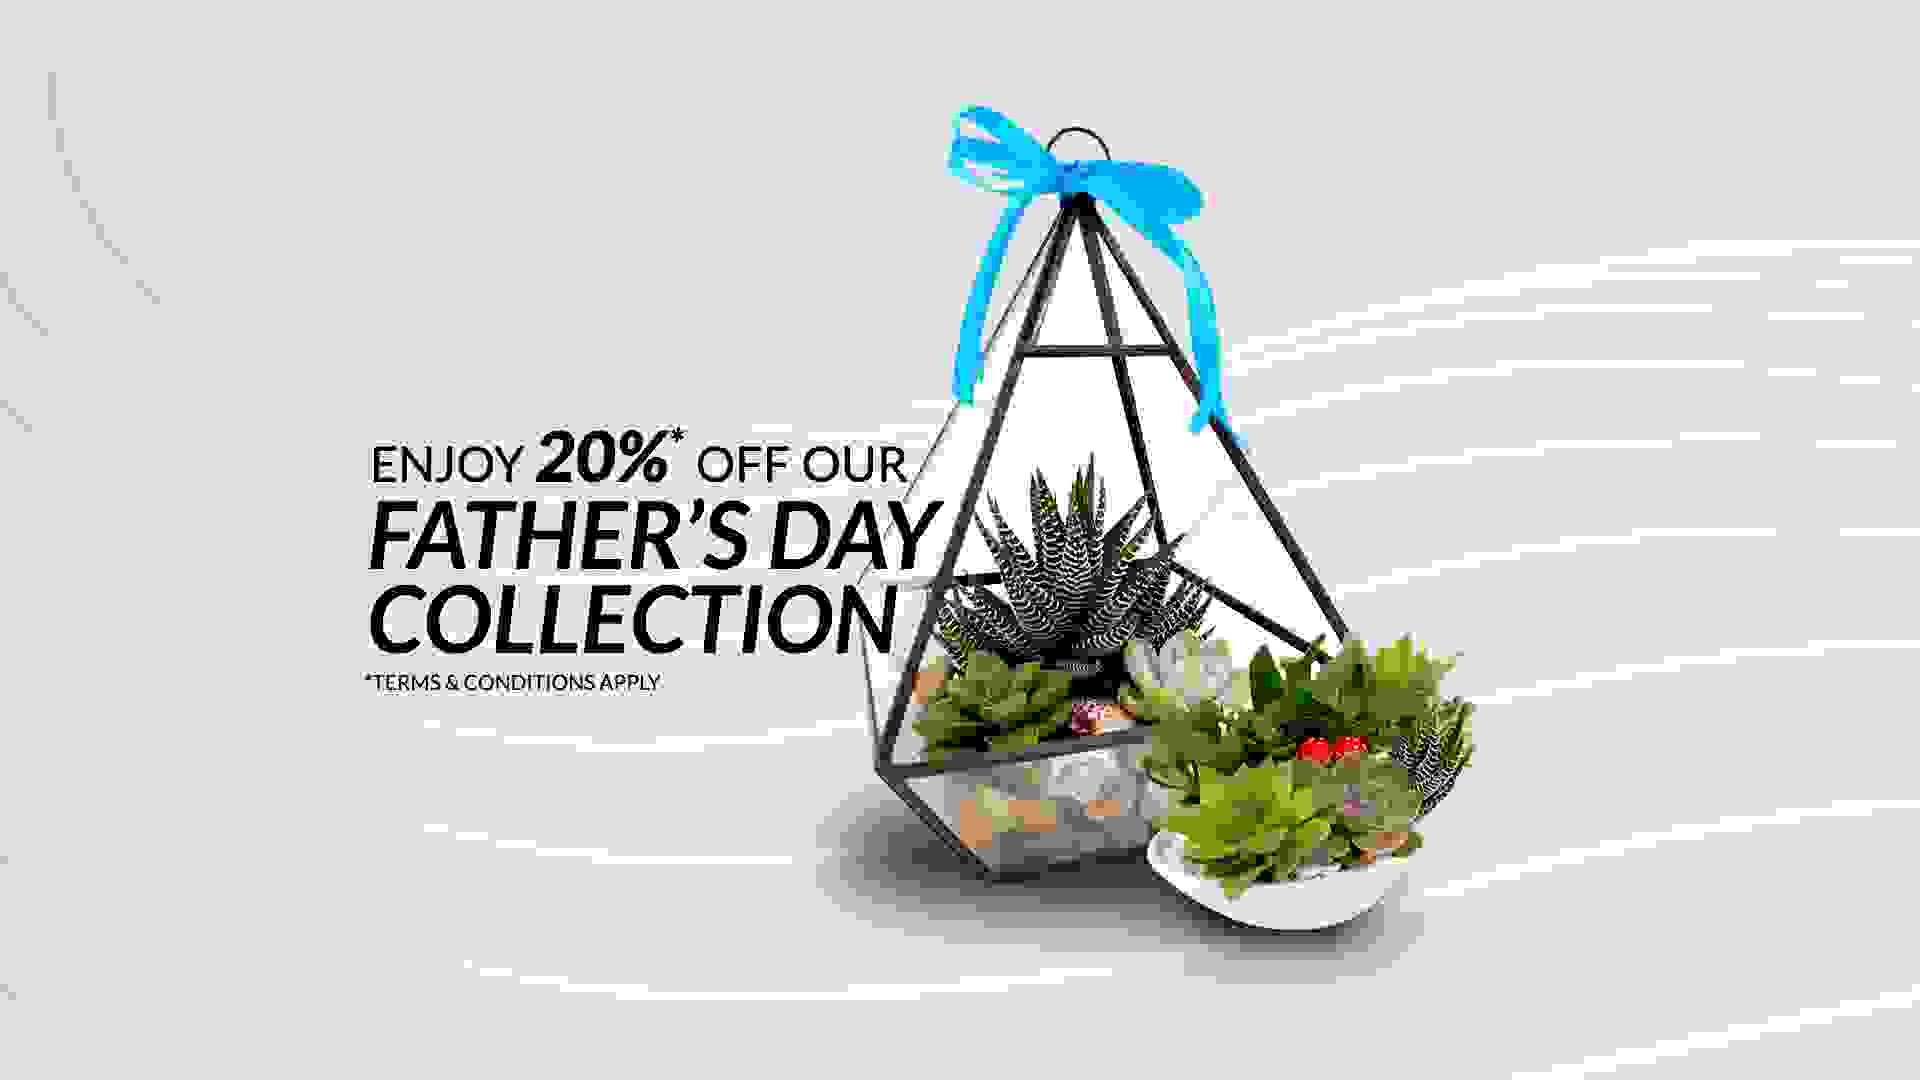 Father's Day eshop Promotion